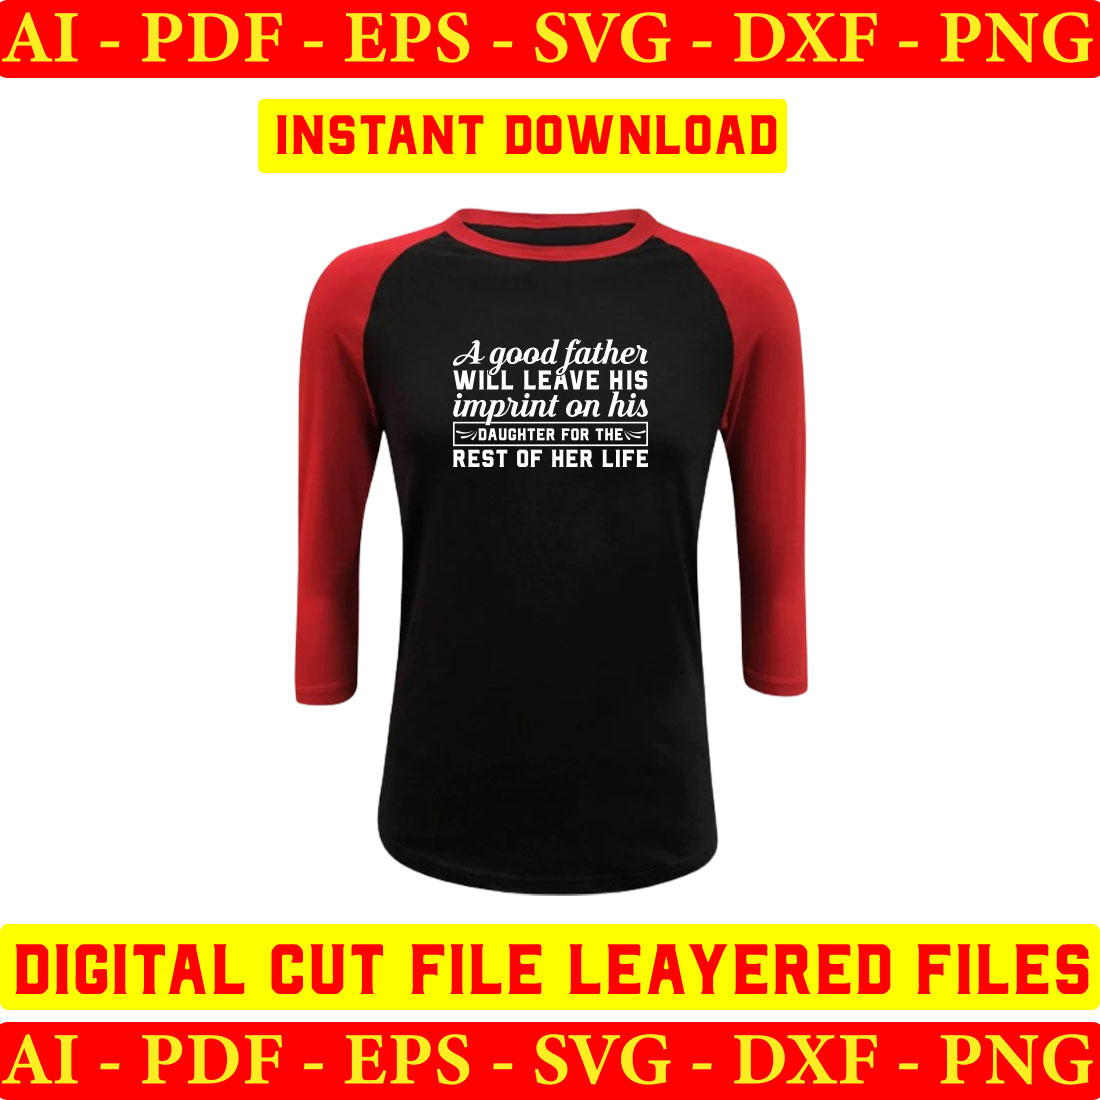 Black and red baseball shirt with the words instant file layered files.